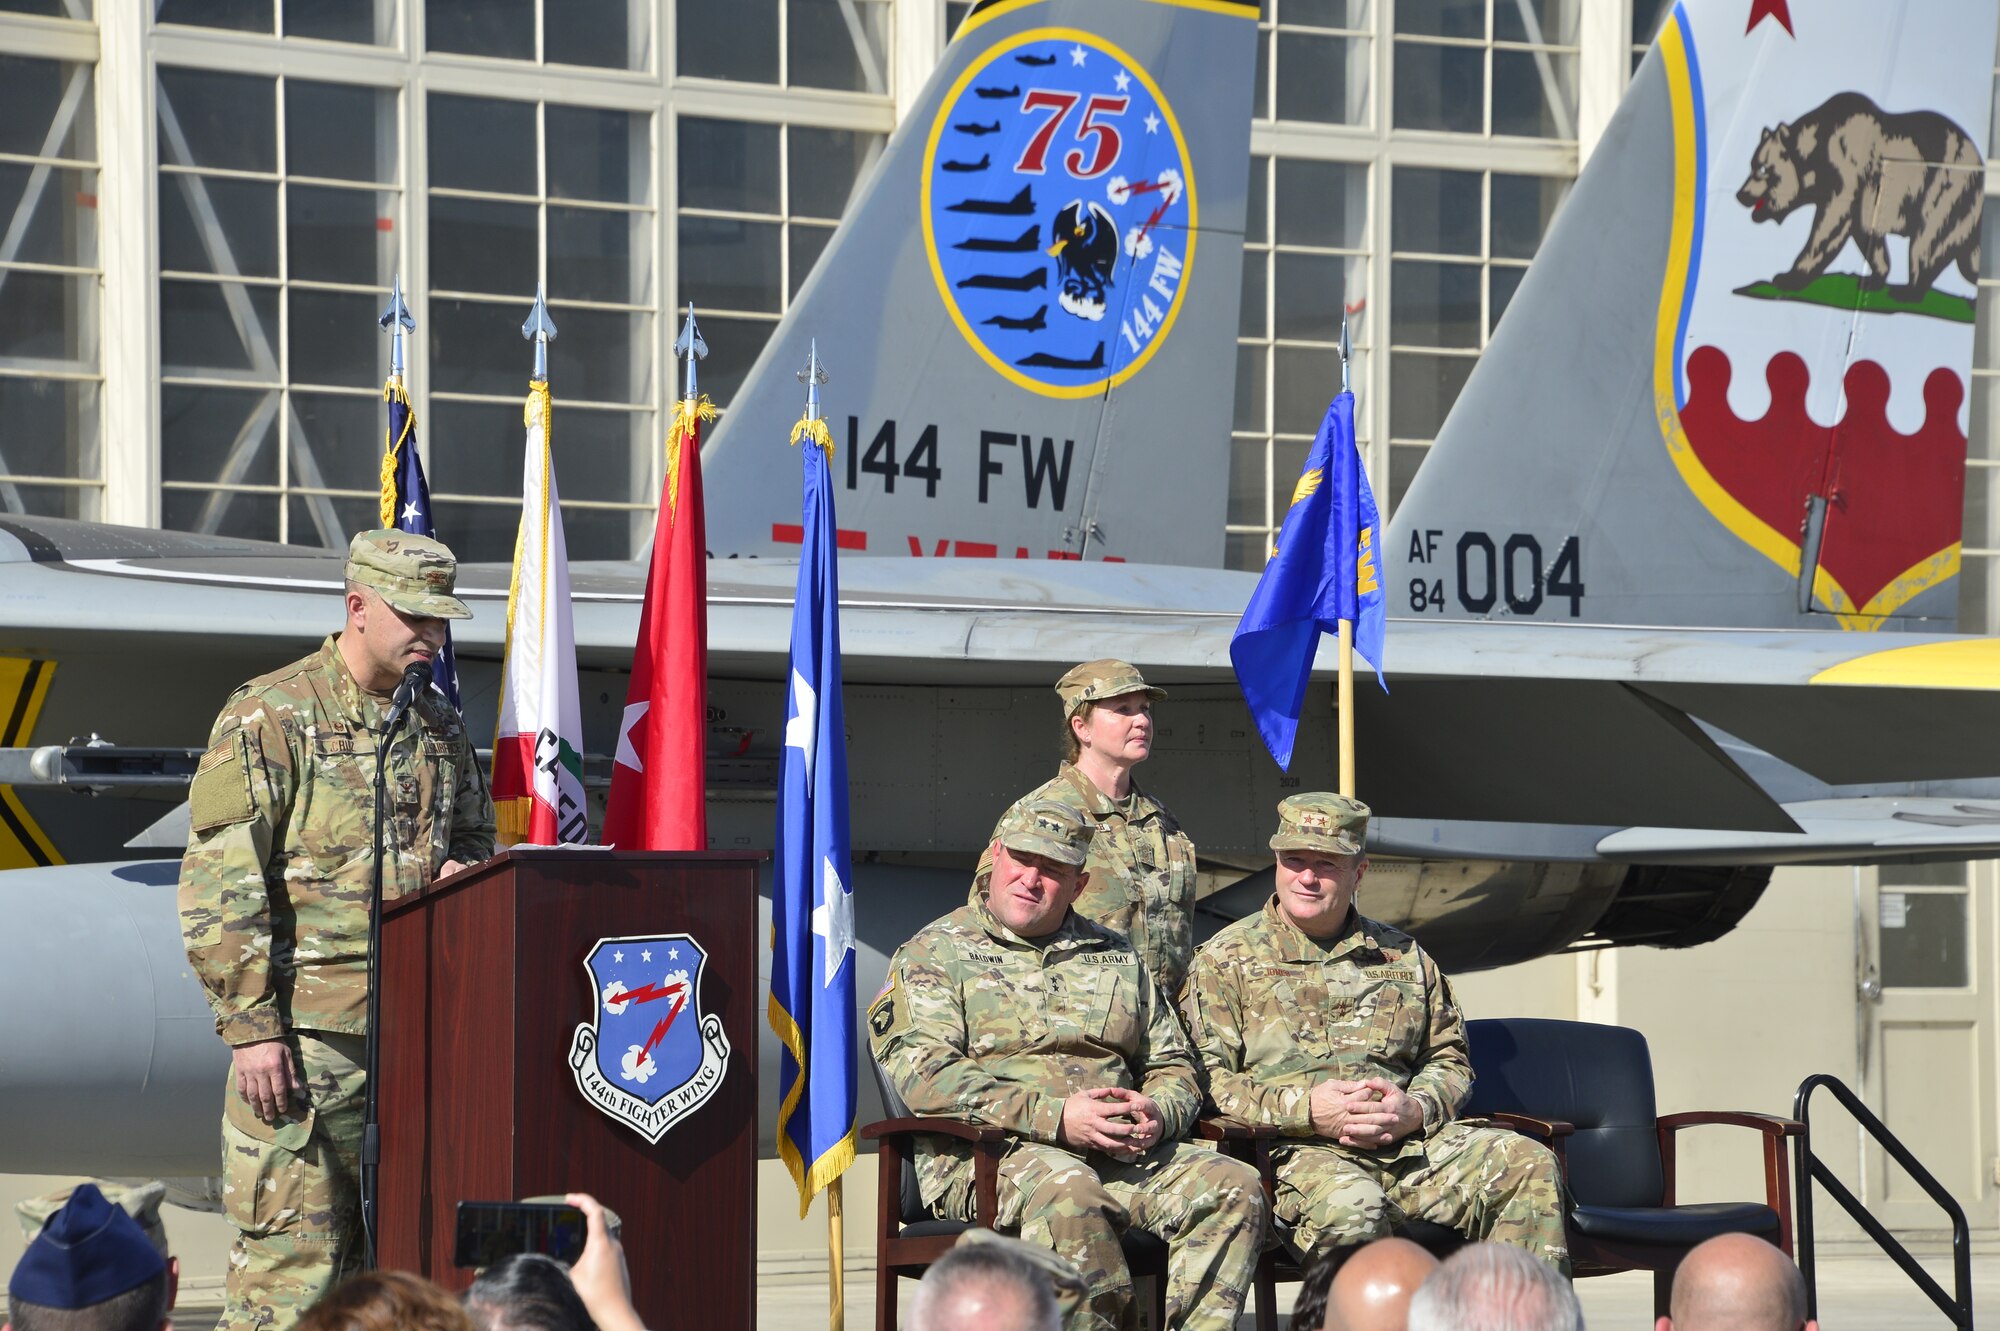 U.S. Air Force Col. Jeremiah Cruz, 144th Fighter Wing commander assumes command of the 144th Fighter Wing Oct. 2, 2019.